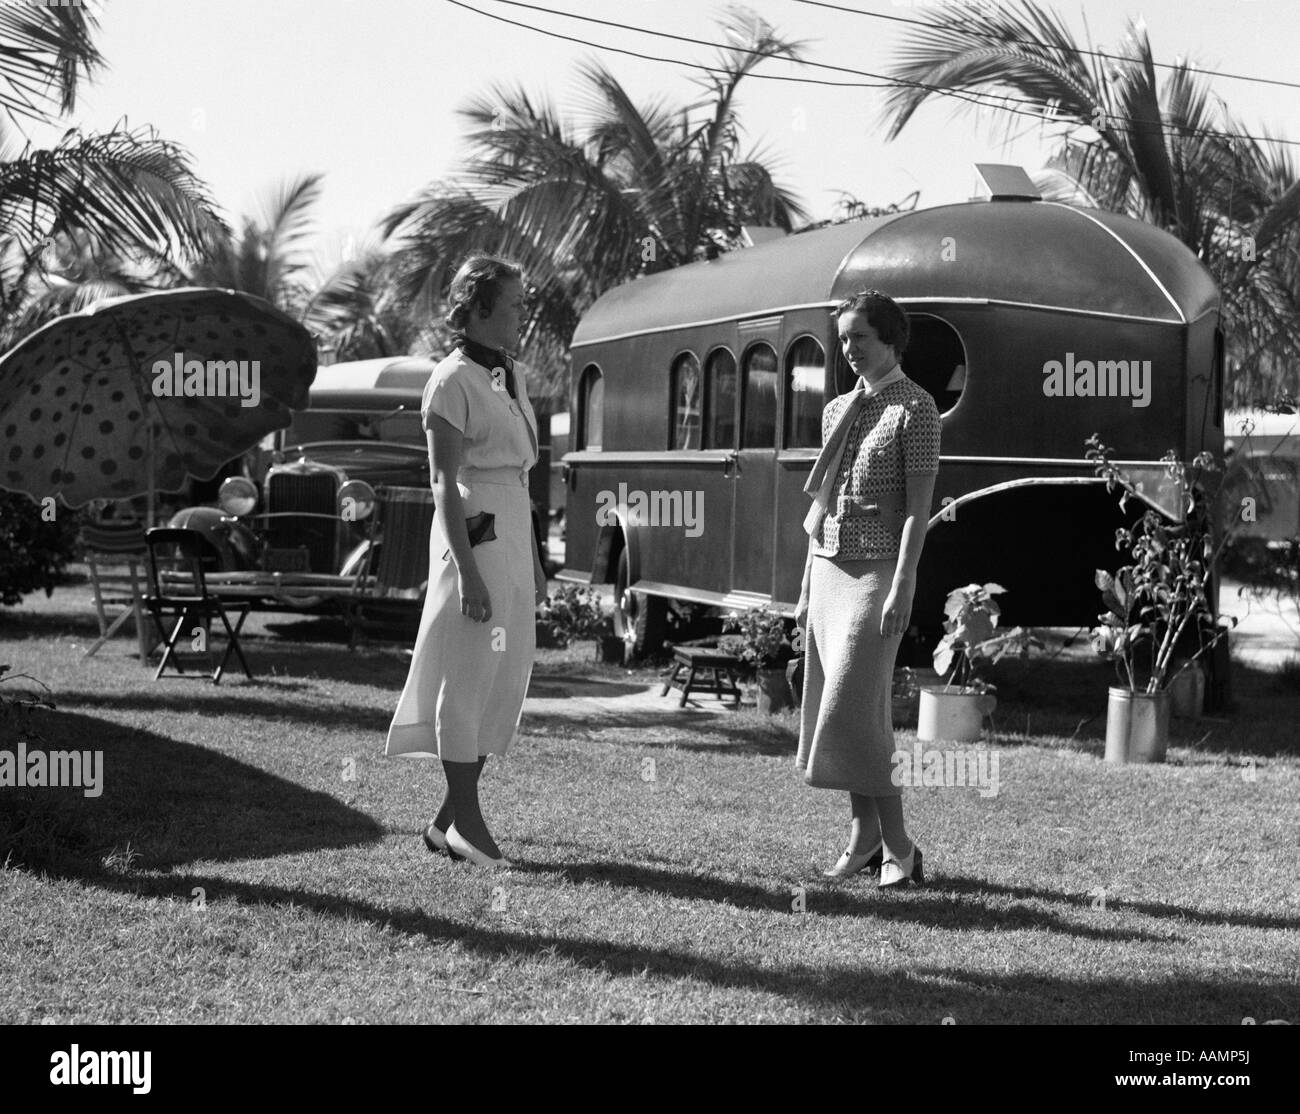 1930s 2 WOMEN STANDING TALKING ON TROPICAL LAWN IN FLORIDA TRAILER PARK WITH A CAR UMBRELLA & CHAIRS Stock Photo